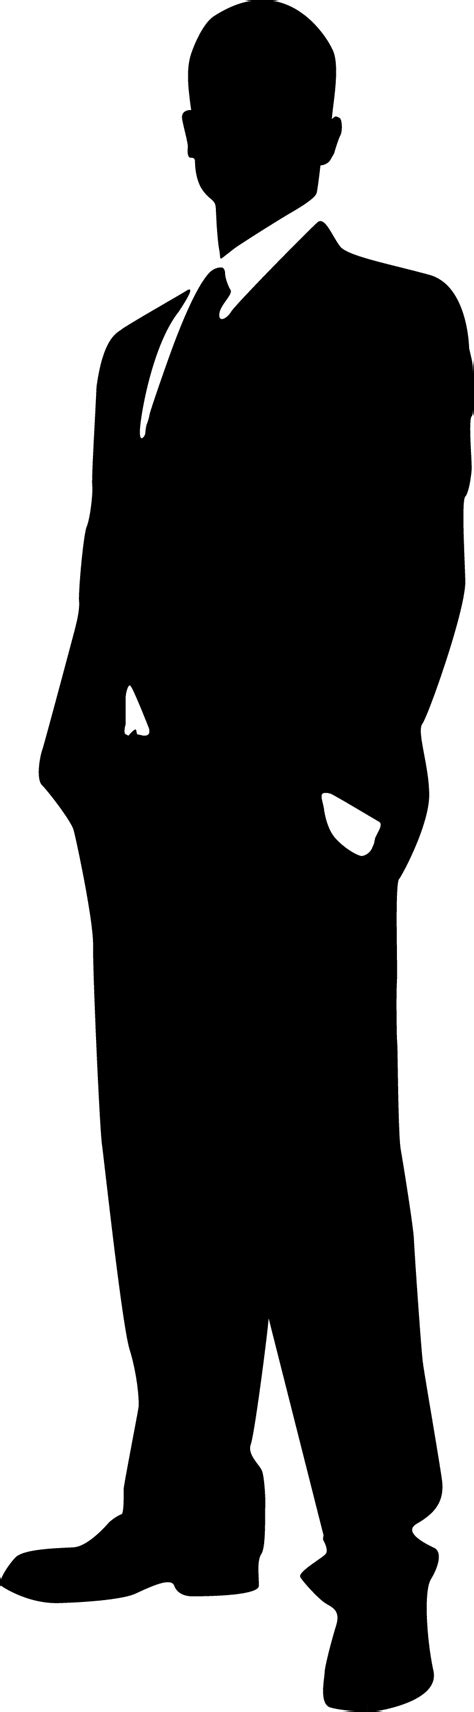 Man Silhouette Outline At Getdrawings Free Download